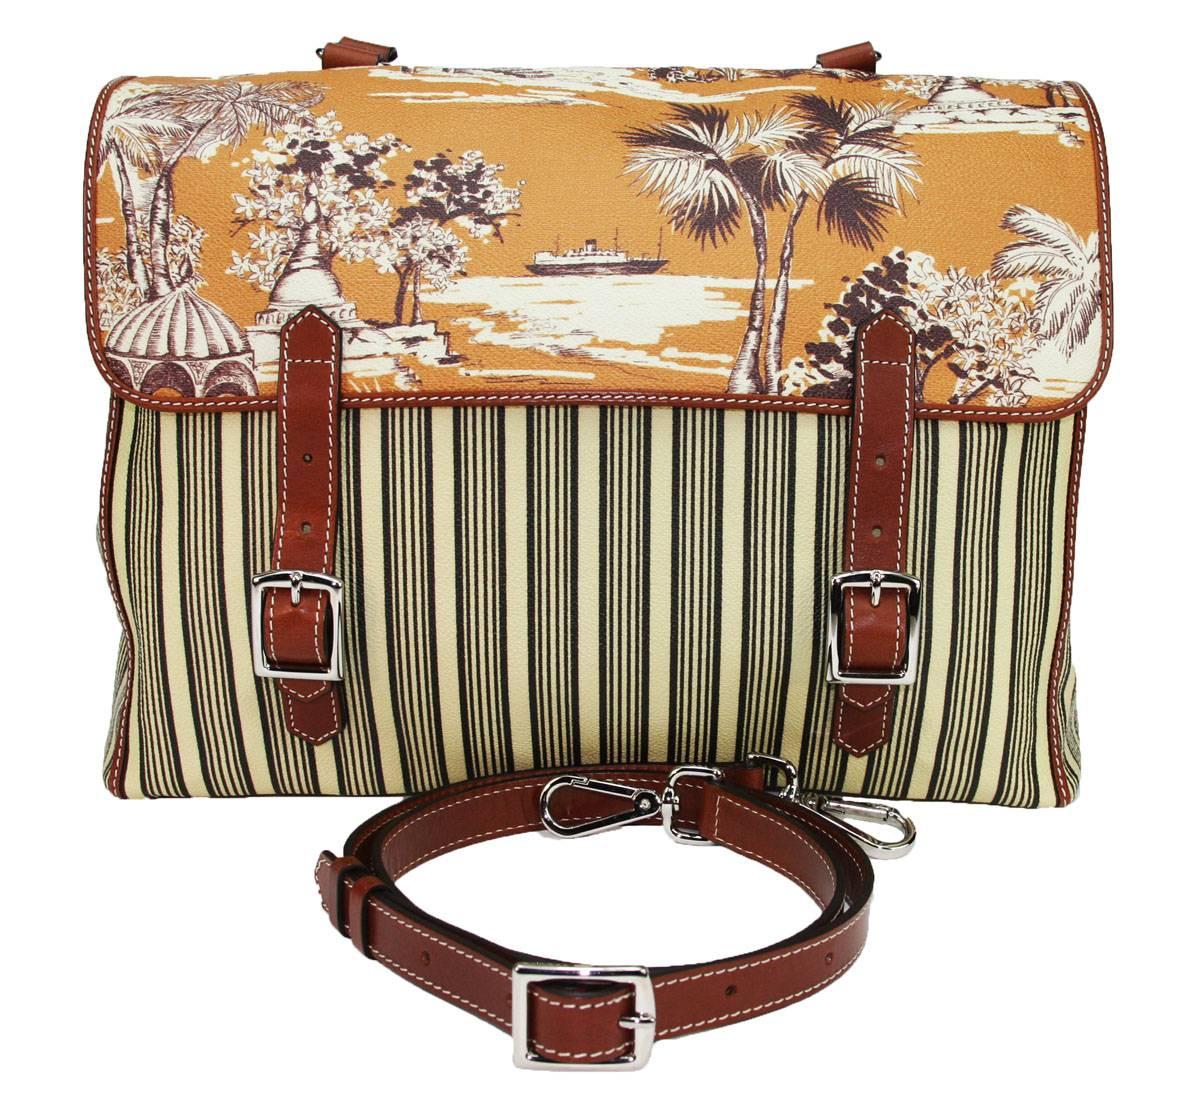 Rare ETRO Satchel Messenger Handbag
Colors – Harvest Orange, Black and Cream Stripes
Material – Coated Canvas and Leather
Hardware Color – Silver
Tropical Setting Images of Palm Trees and Ship
Several Pockets
Orange Lining
Removable and Adjustable